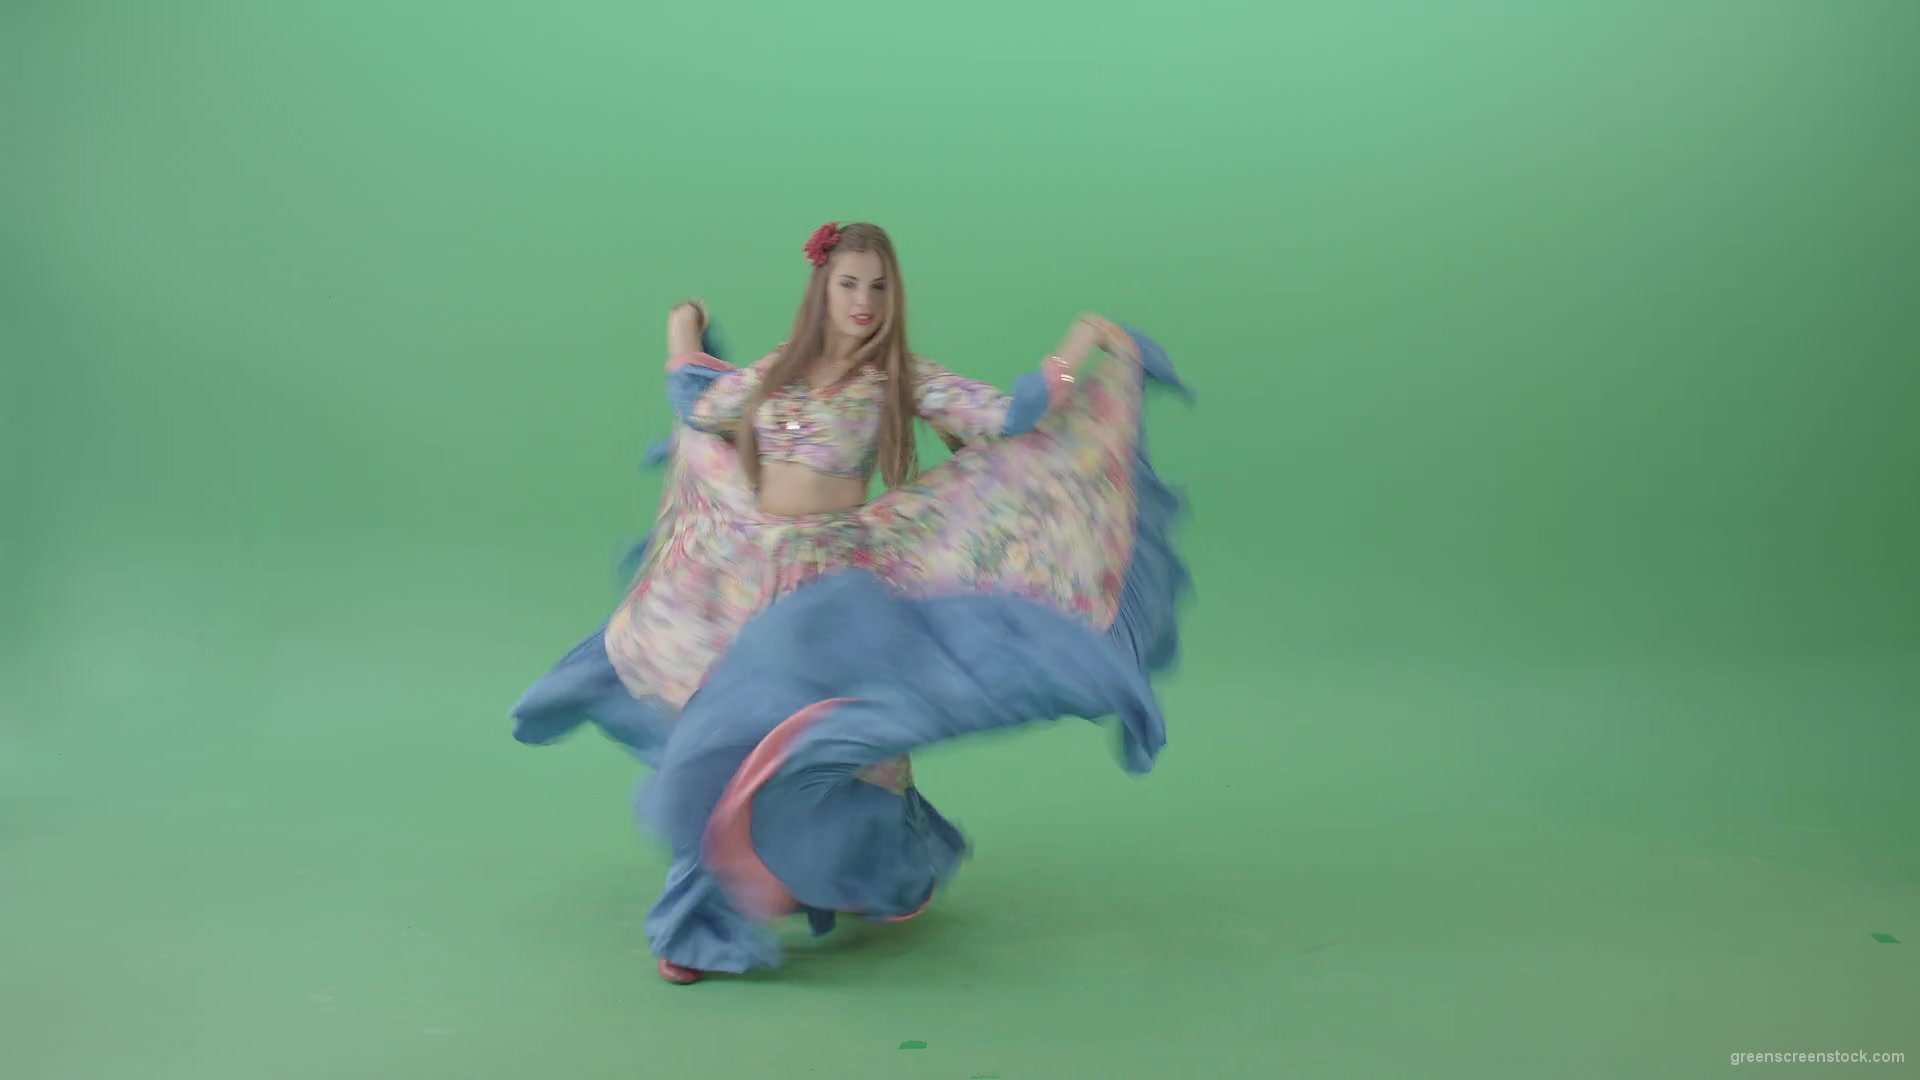 Balkan-roma-girl-waving-gypsy-dress-and-dancing-isolated-on-green-screen-4K-Video-Footage-1-1920_006 Green Screen Stock